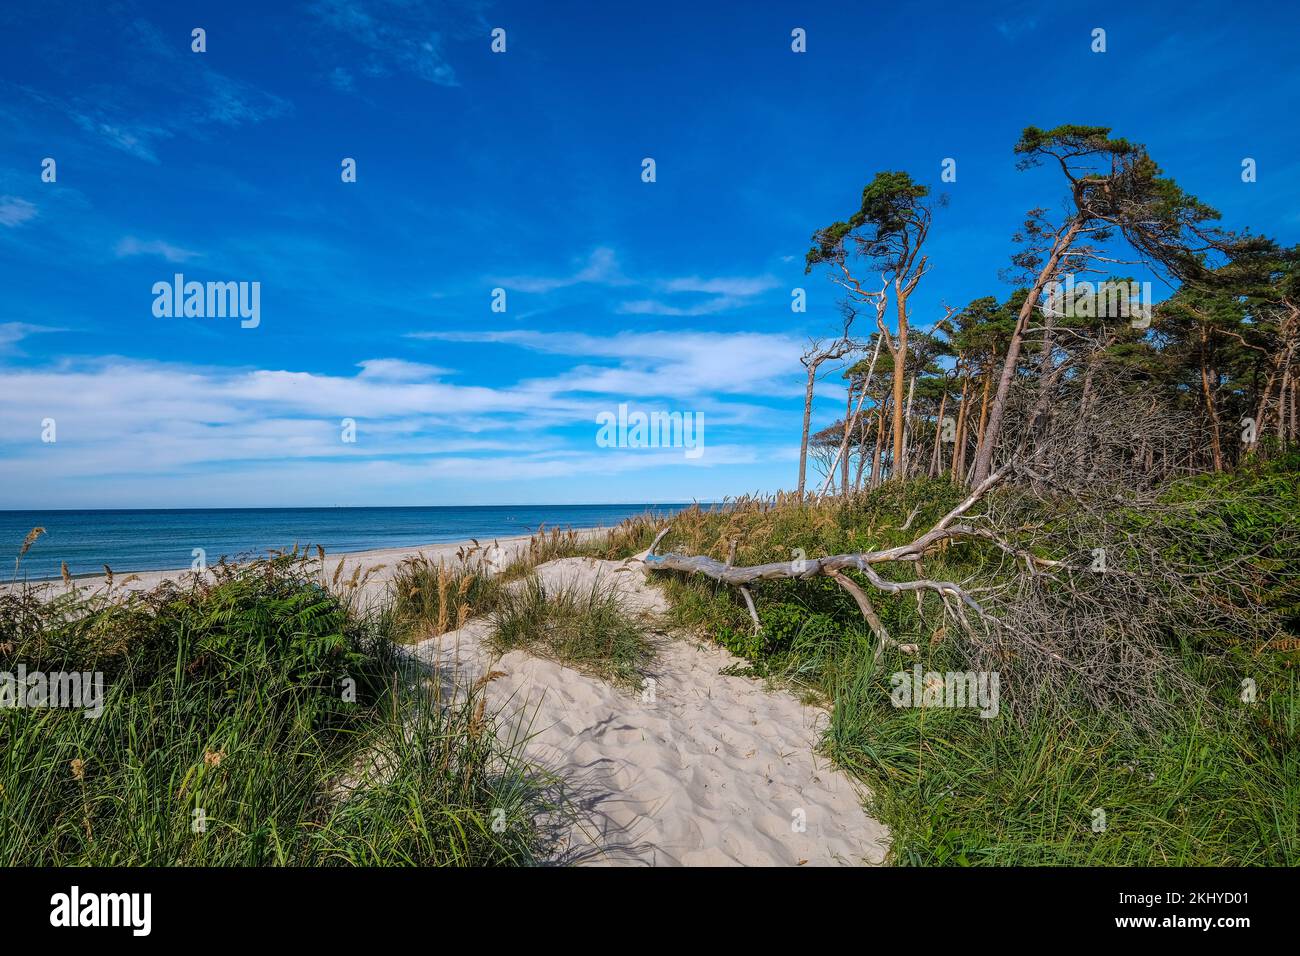 Born am Darss, Fischland-Darss-Zingst, Mecklenburg-Vorpommern, Germany - pine forest in the dunes on the Darss west beach north of Ahrenshoop. On the Stock Photo